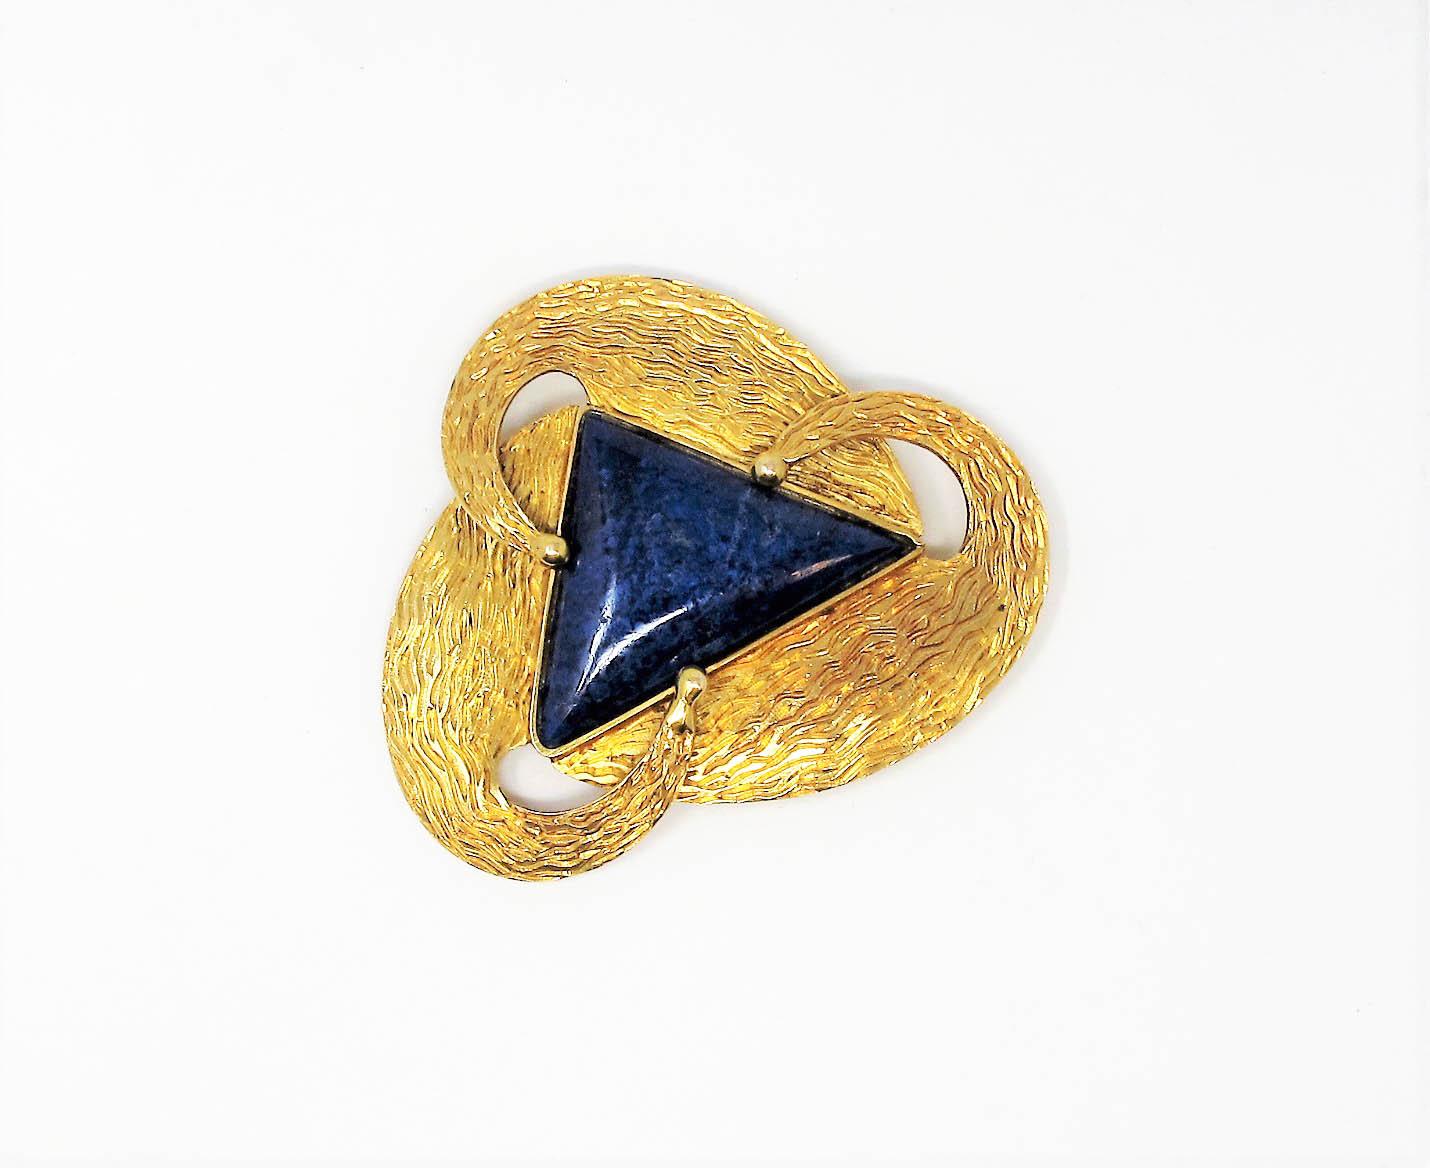 Gorgeous handmade lapis lazuli and 14 karat yellow gold brooch. This incredible piece is substantial in both size and design. The rich, variegated blue lapis stone really pops against the ornately carved yellow gold setting. This wearable work of